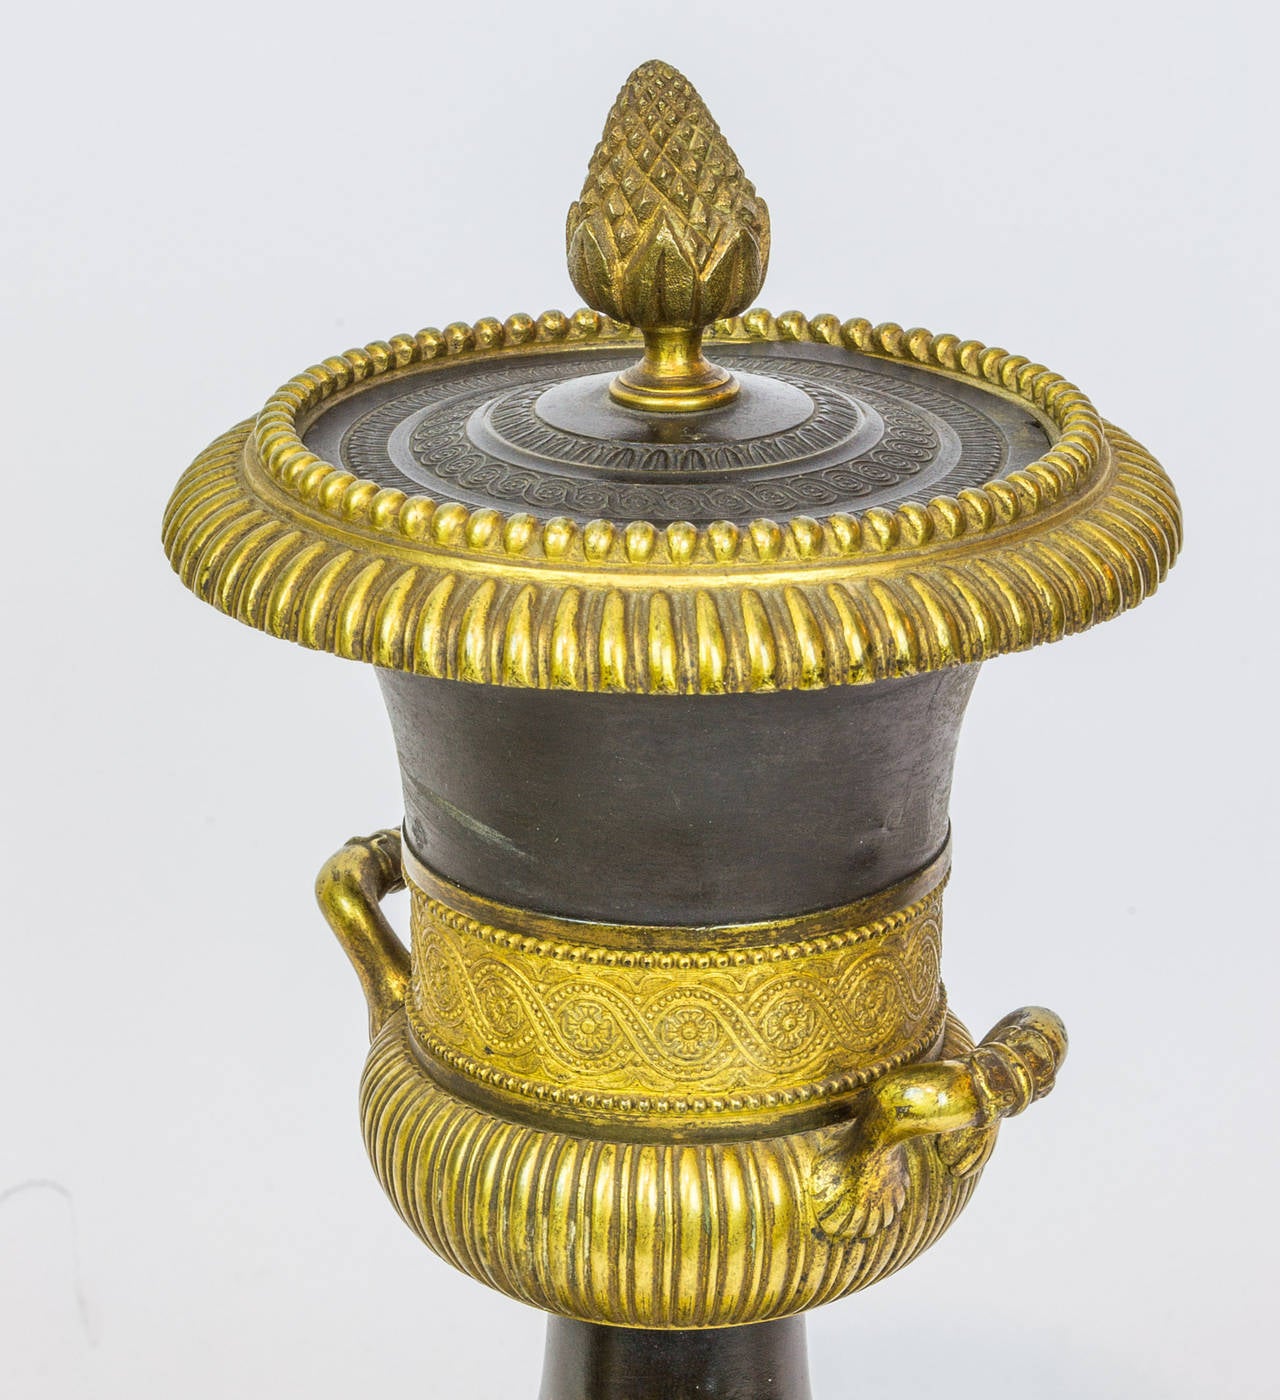 Fine Pair of Empire Patinated and Gilt Bronze Covered Urns
Stock Number: DA74